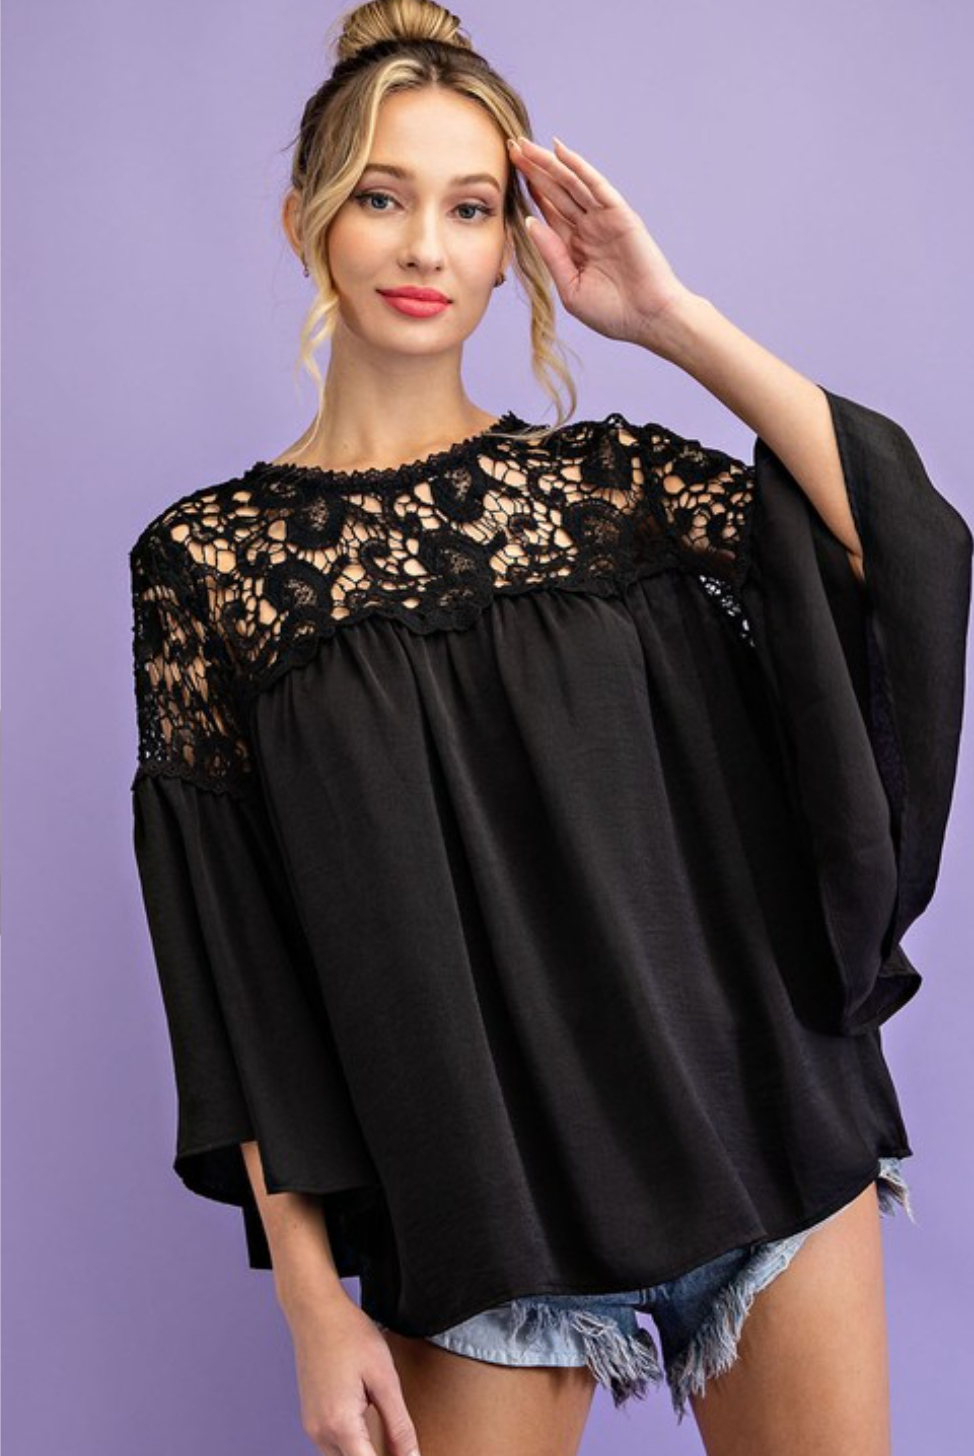 Top: Black bell laced top